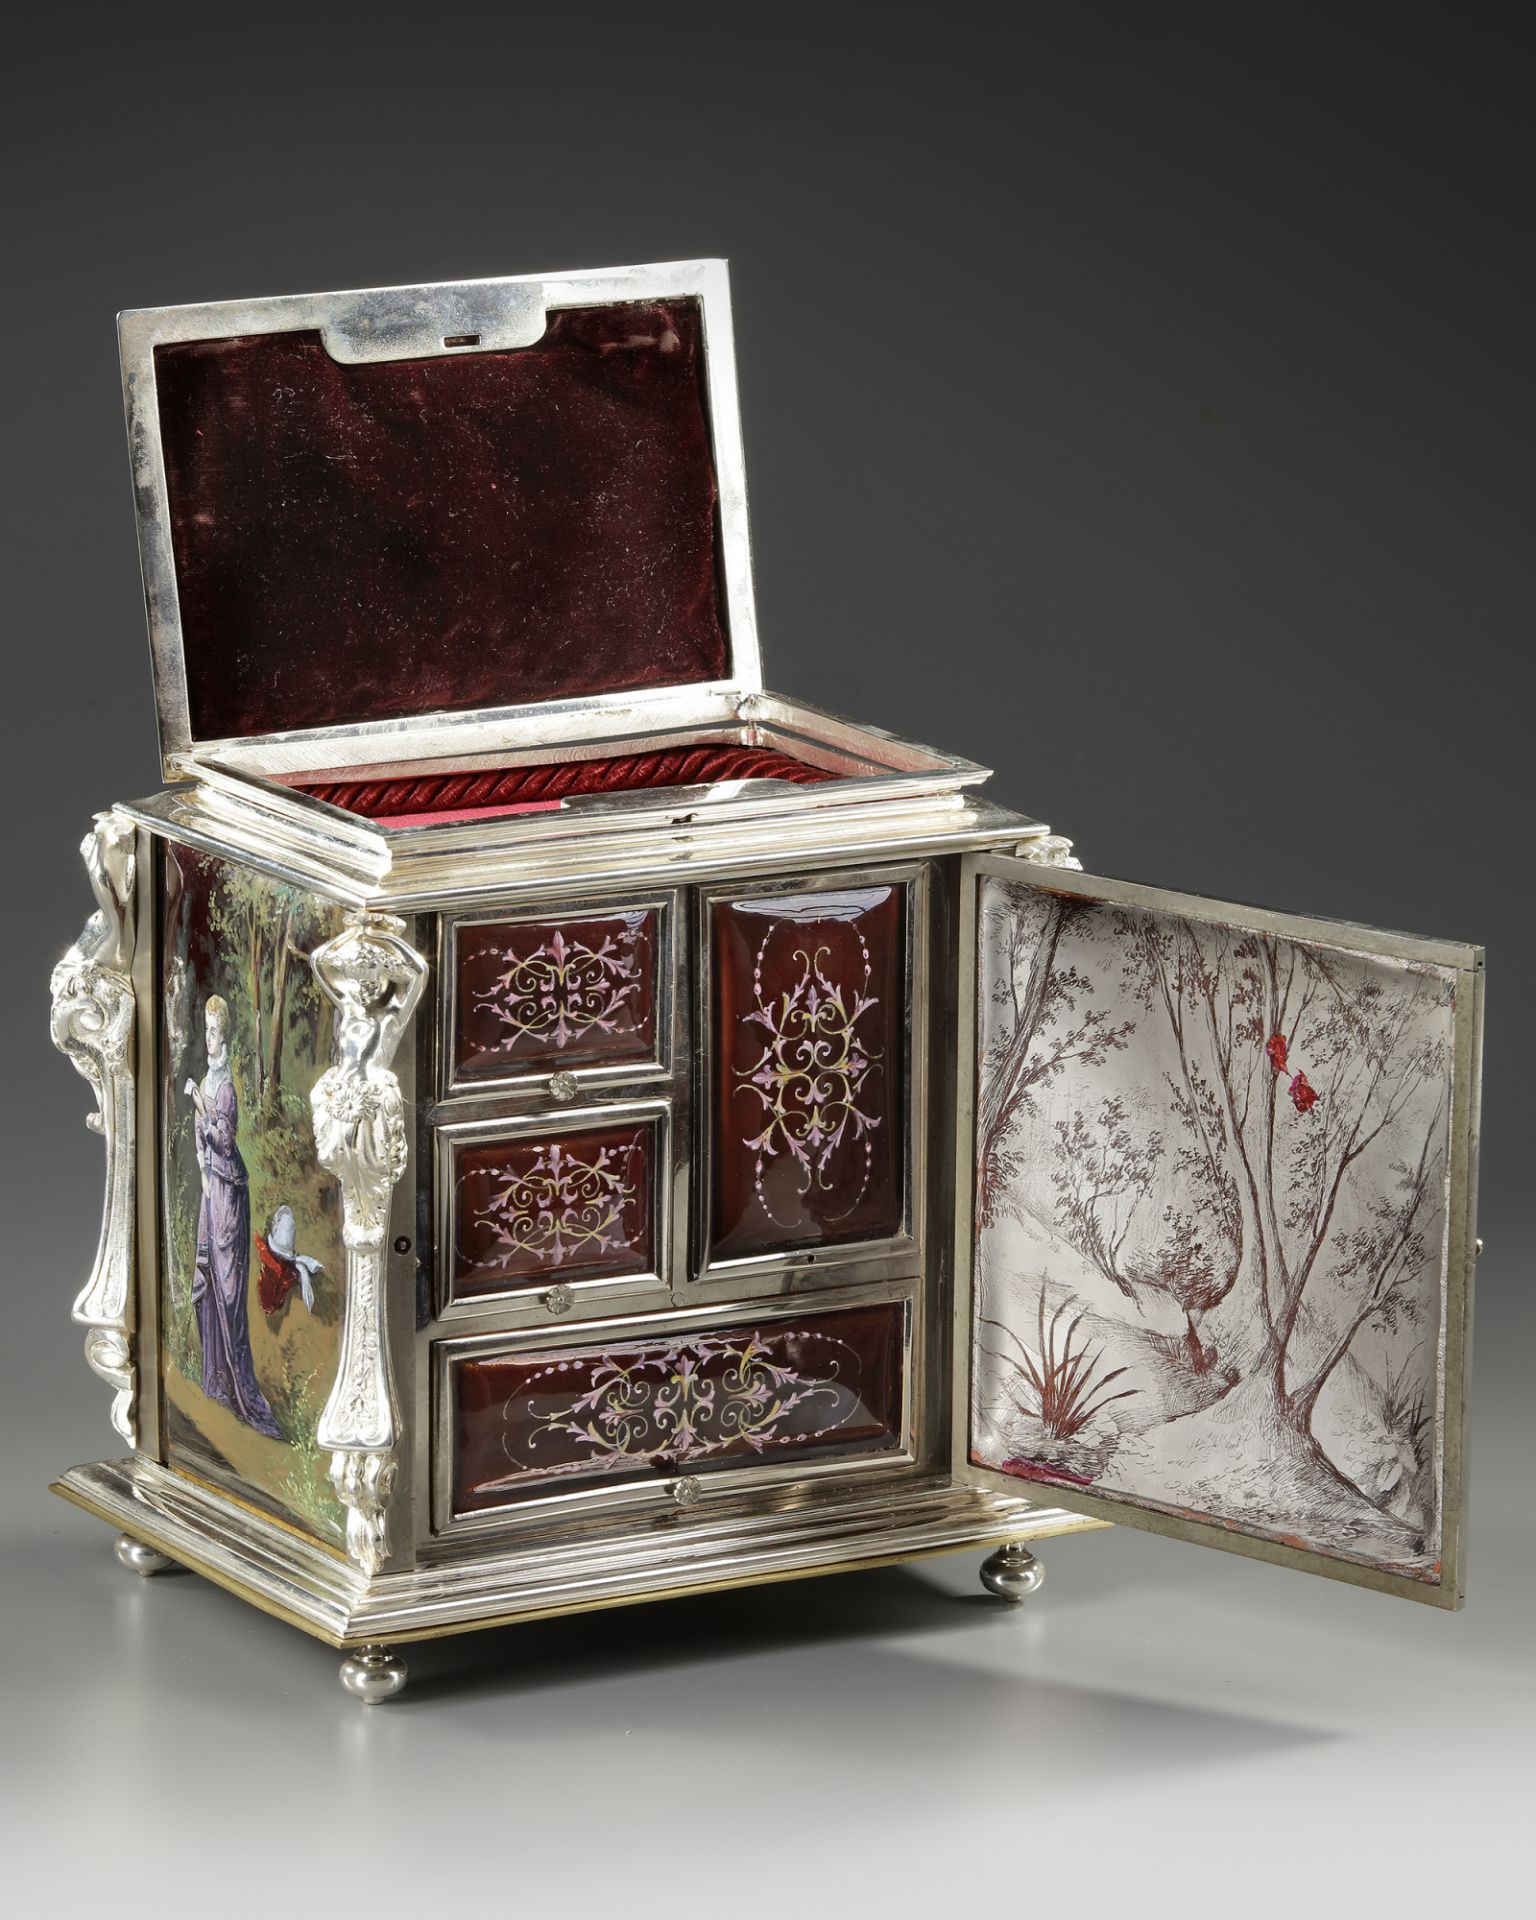 A JEWELRY BOX, FRANCE, LATE 19TH CENTURY - Image 4 of 5